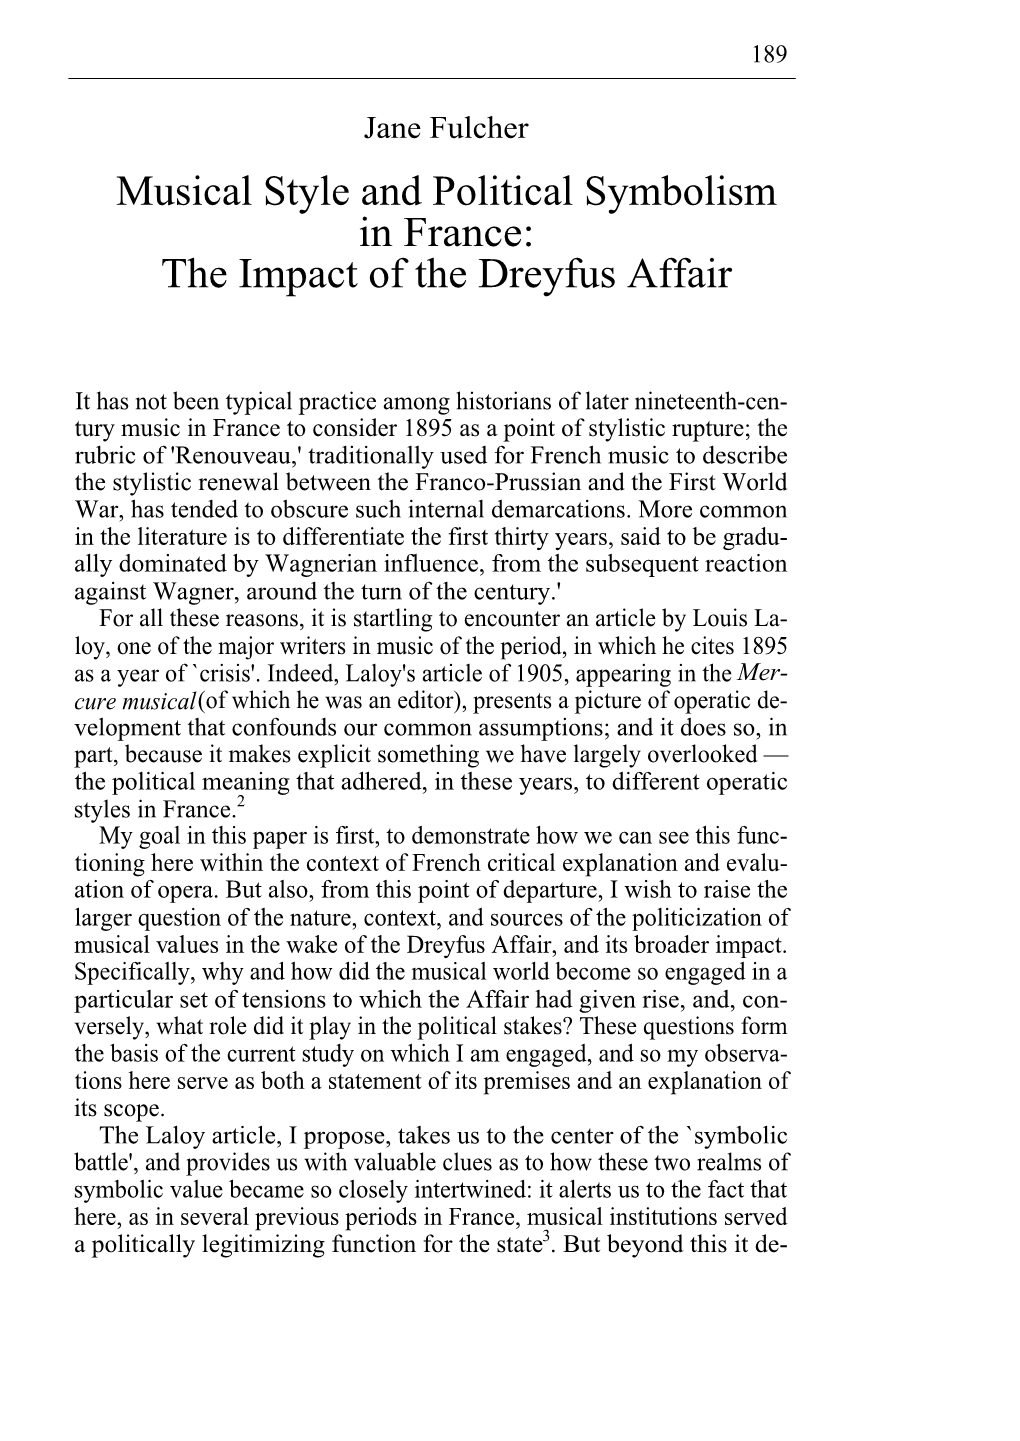 Musical Style and Political Symbolism in France: the Impact of the Dreyfus Affair